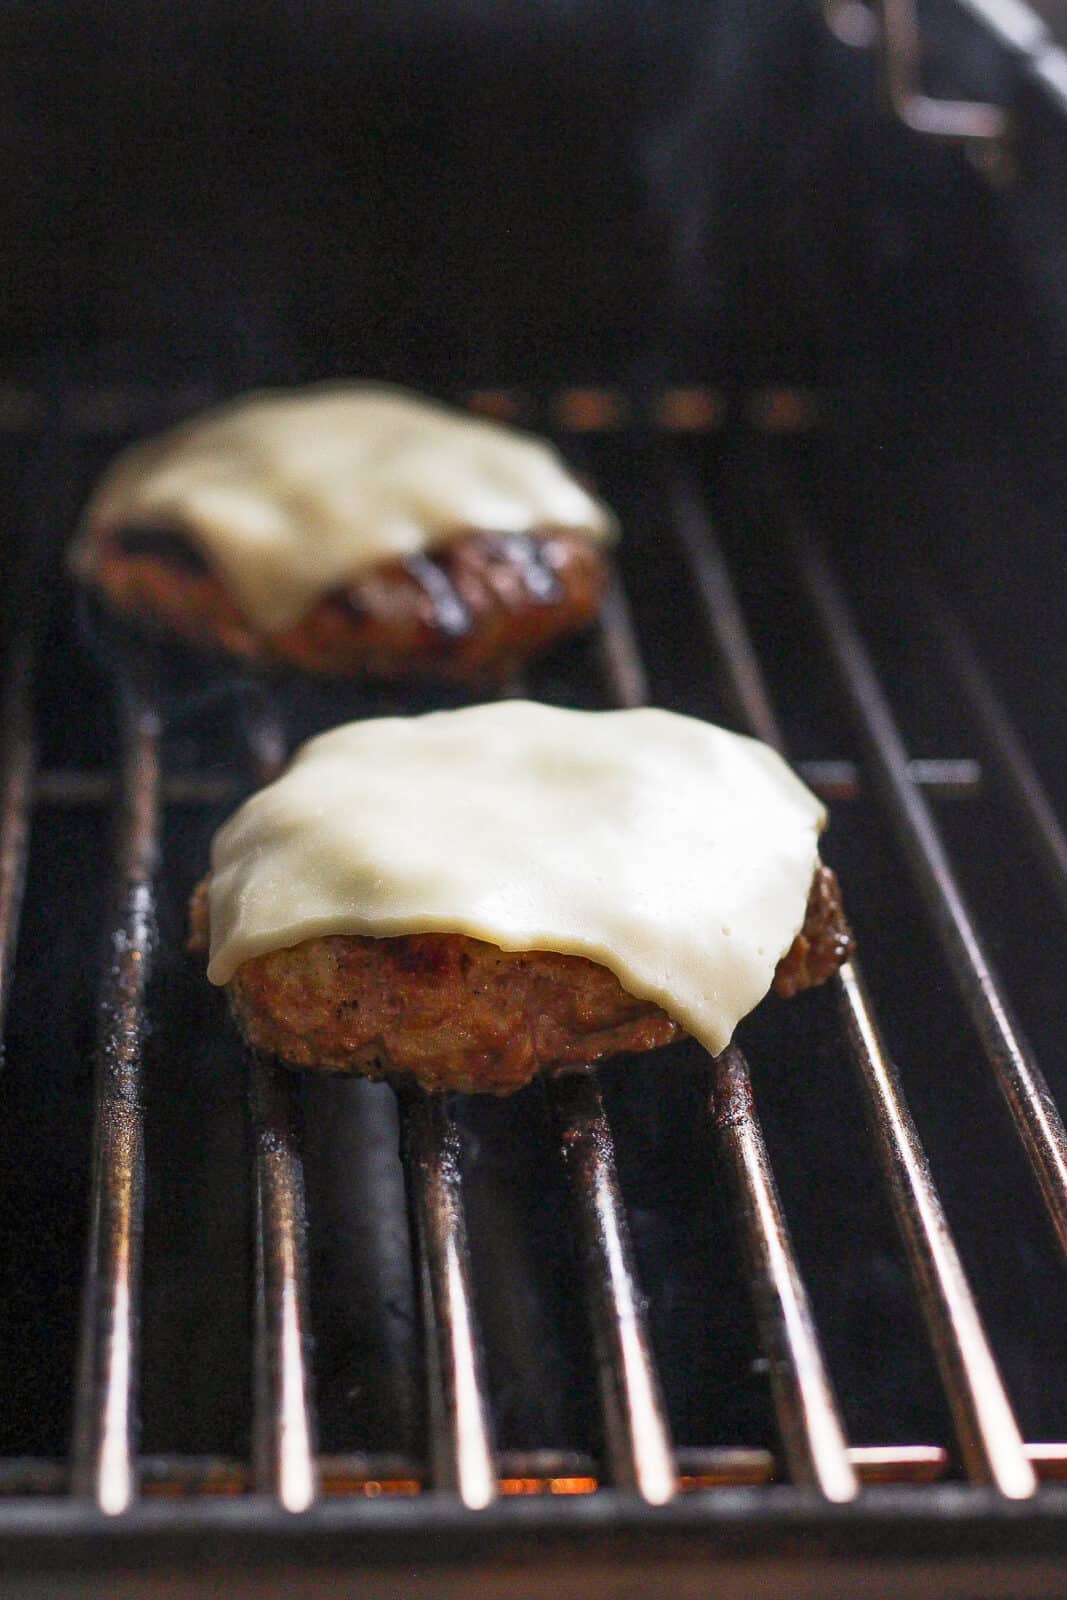 Turkey burgers with cheese on top on the grill.